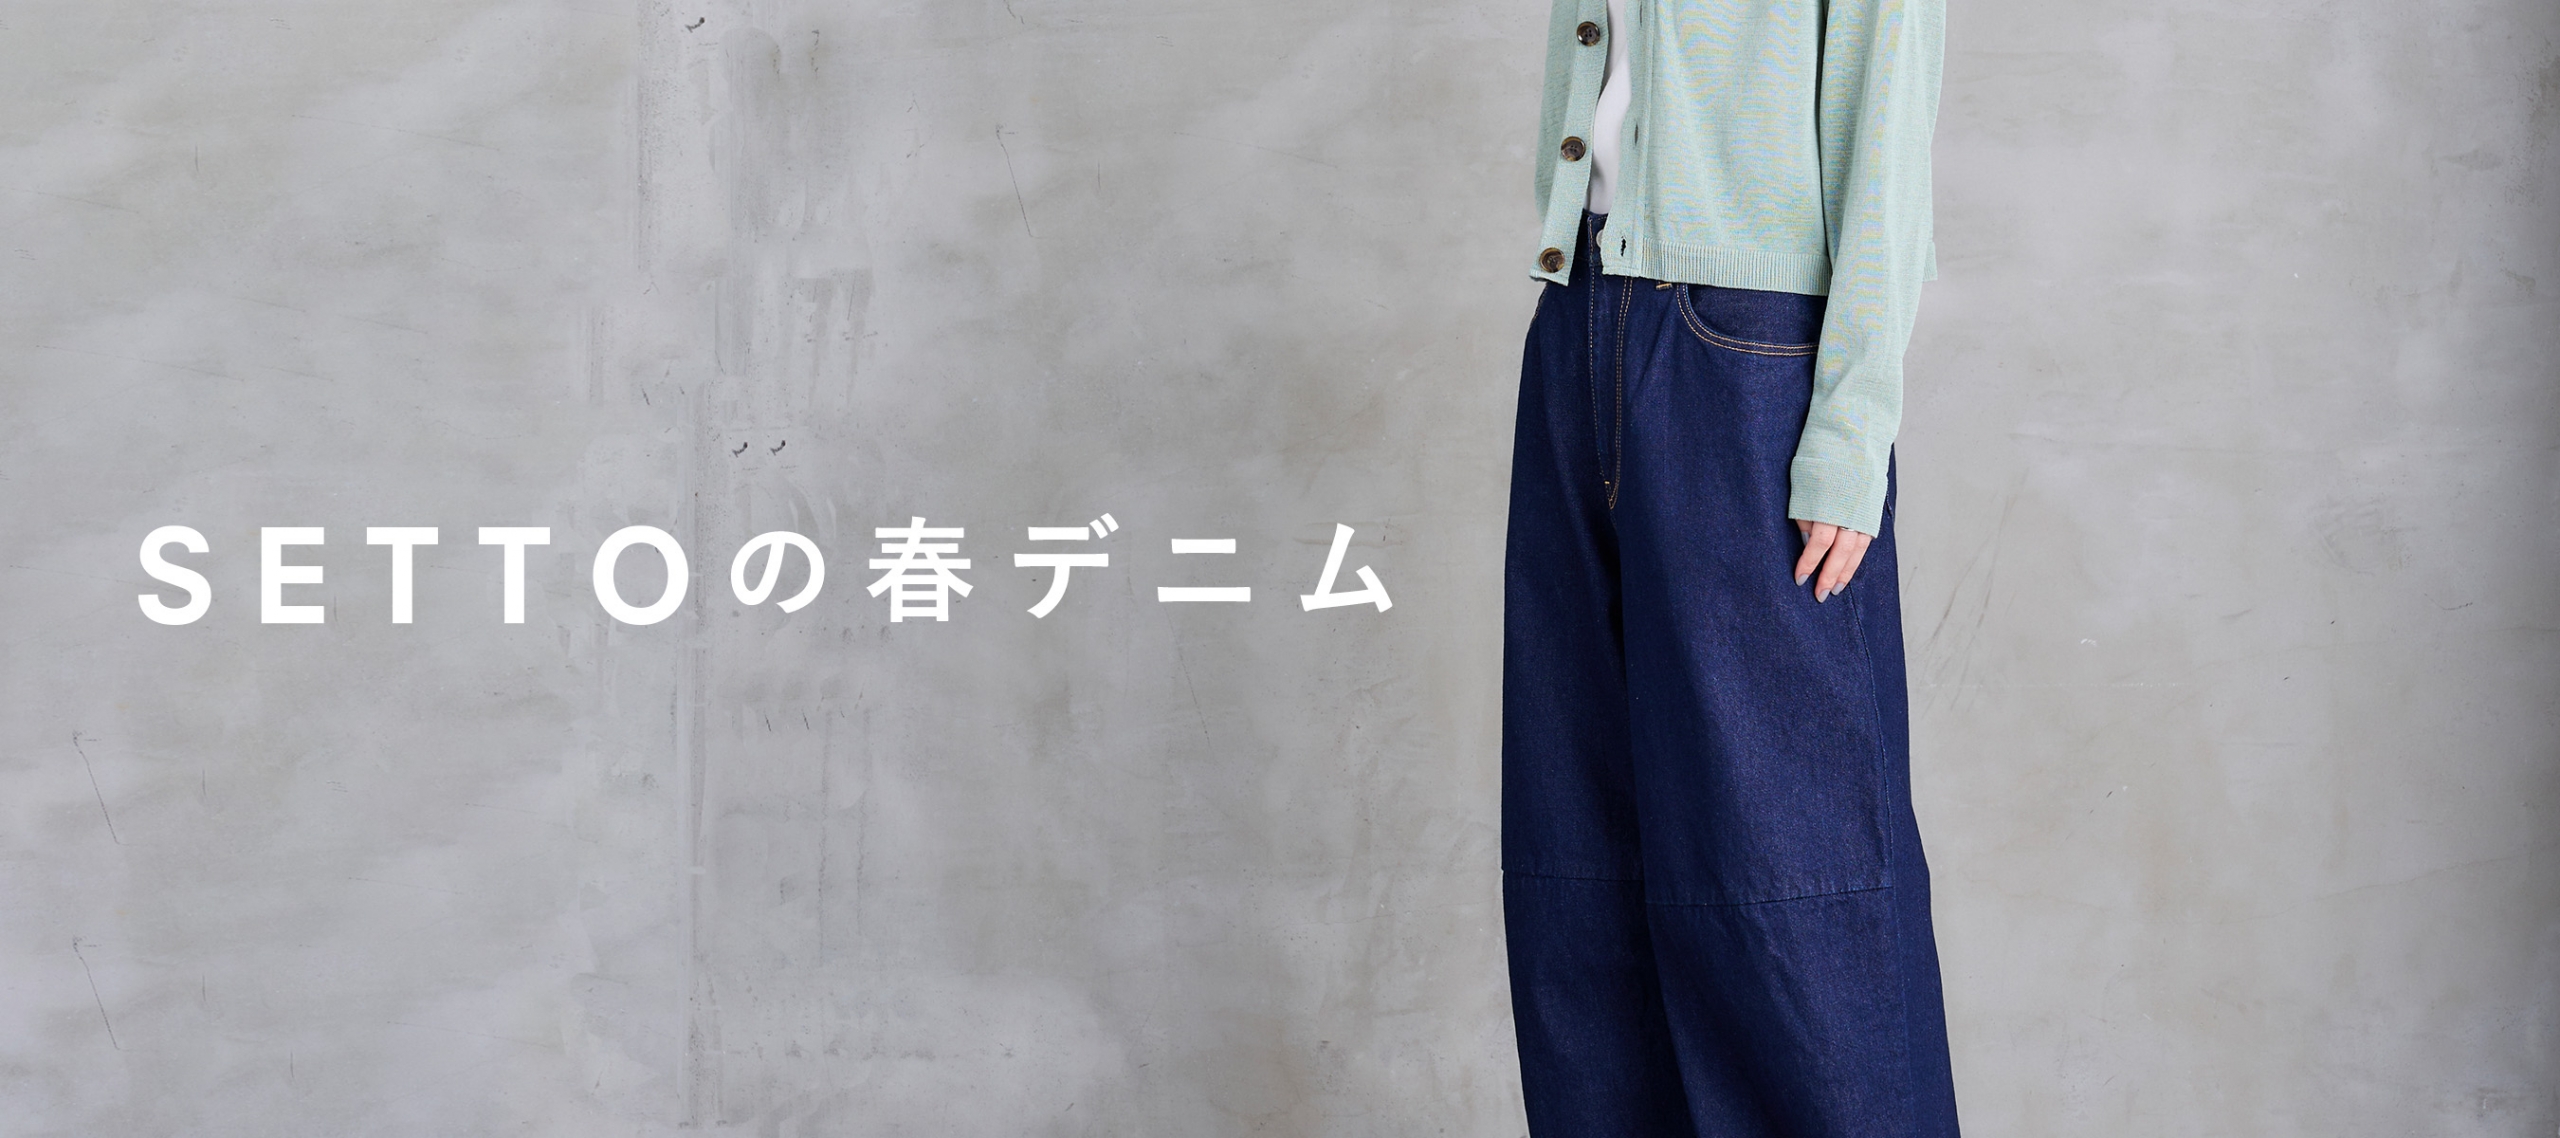 SETTO 24SS New Jeans